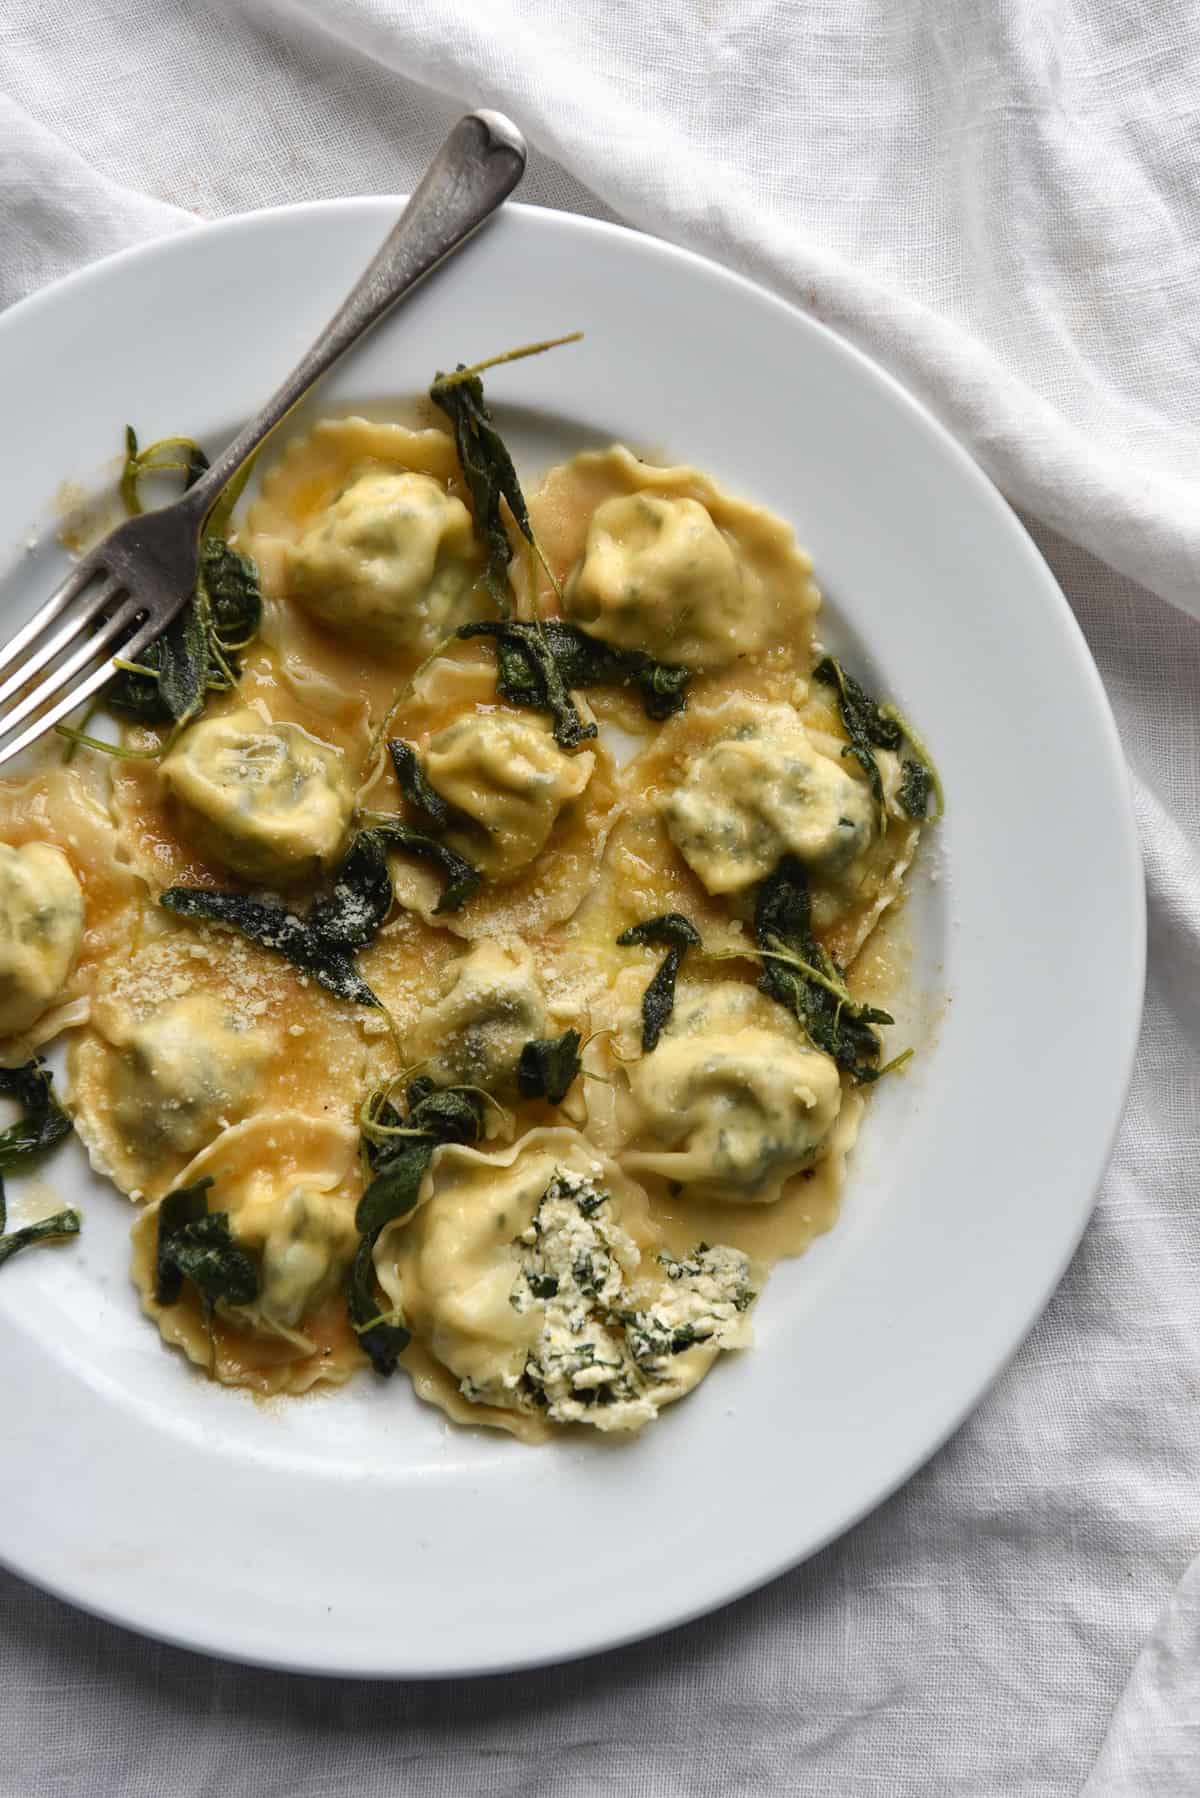 An aerial view of a plate of gluten free ravioli filled with spinach and ricotta and topped with brown butter and sage. The pasta sits in a white dish atop a white linen tablecloth